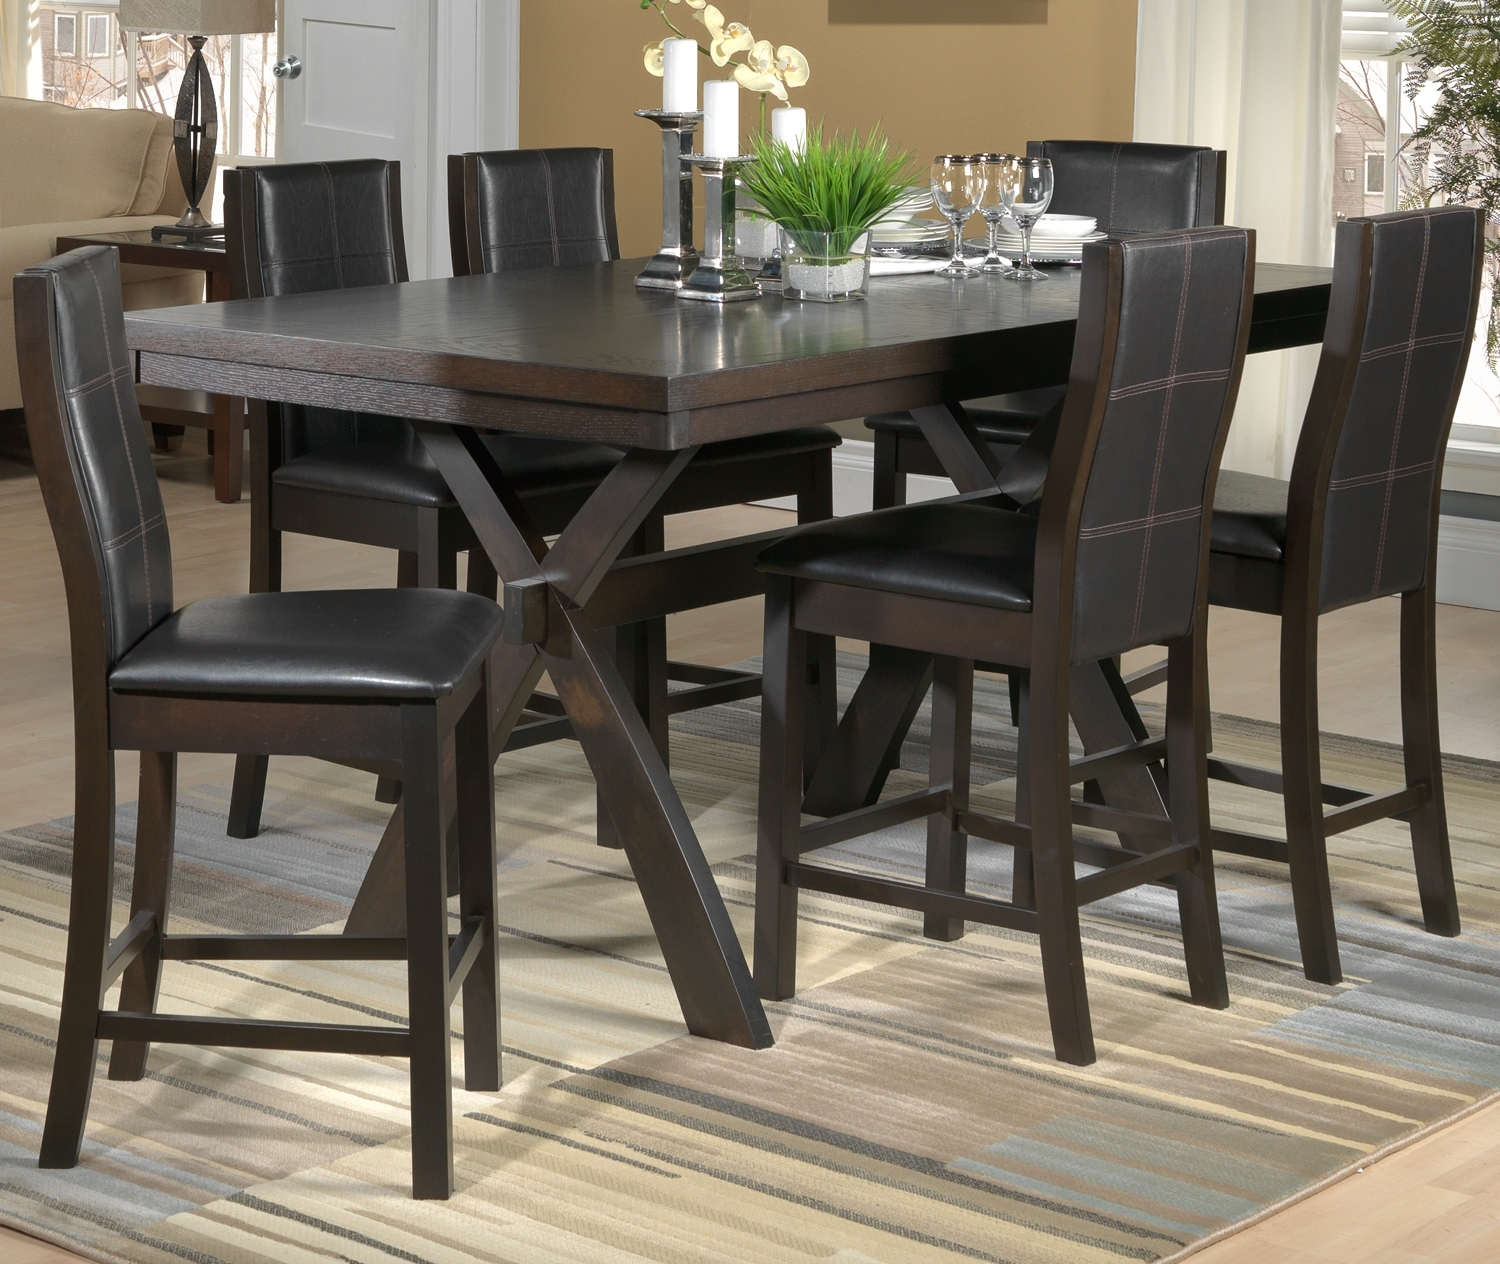 Leons Dining Room Sets Domainmichael Layjao pertaining to dimensions 1500 X 1264